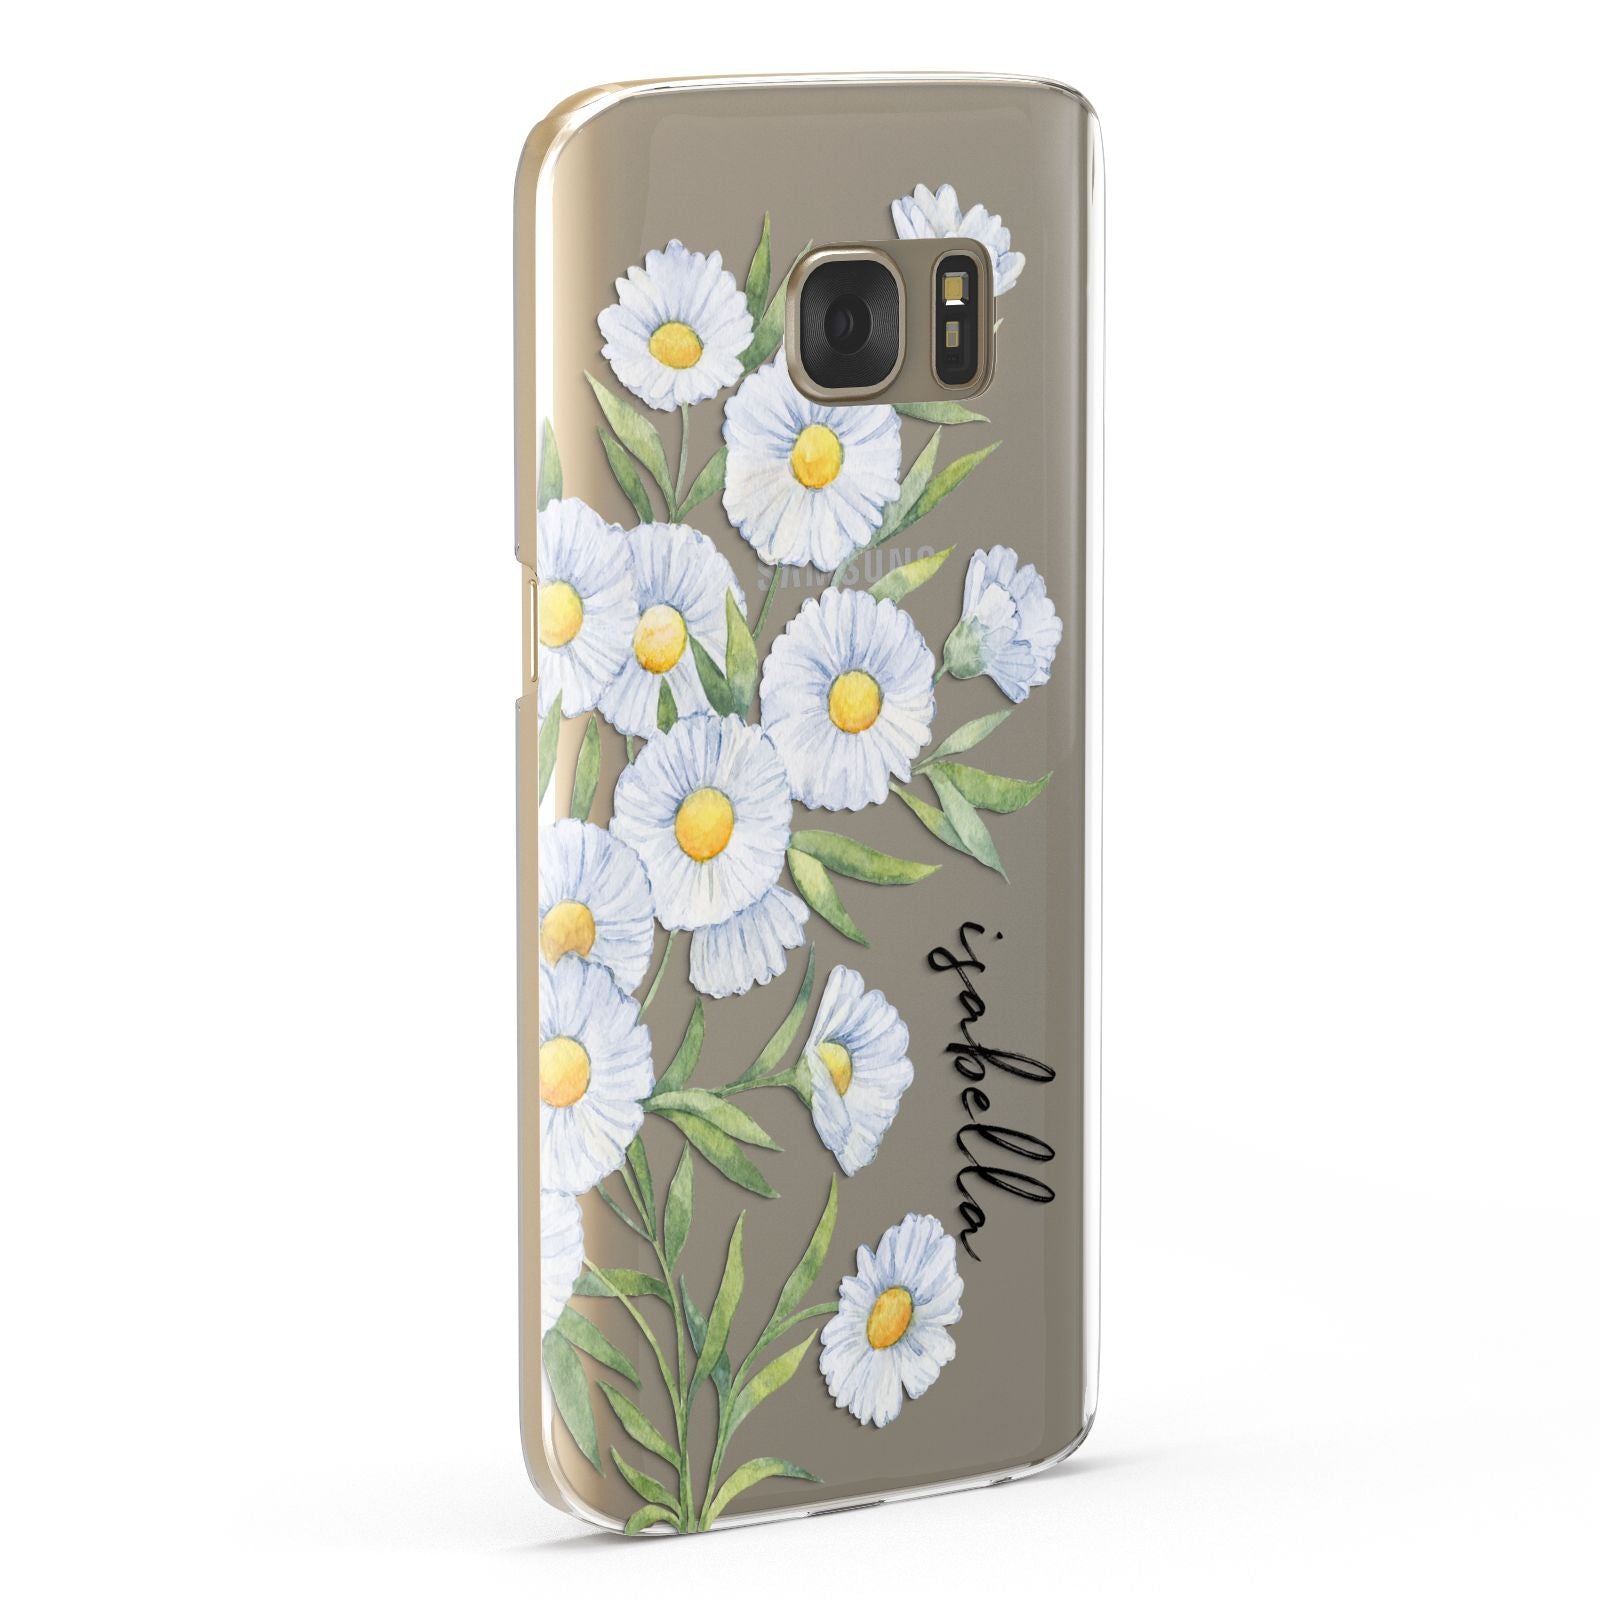 Personalised Daisy Flower Samsung Galaxy Case Fourty Five Degrees